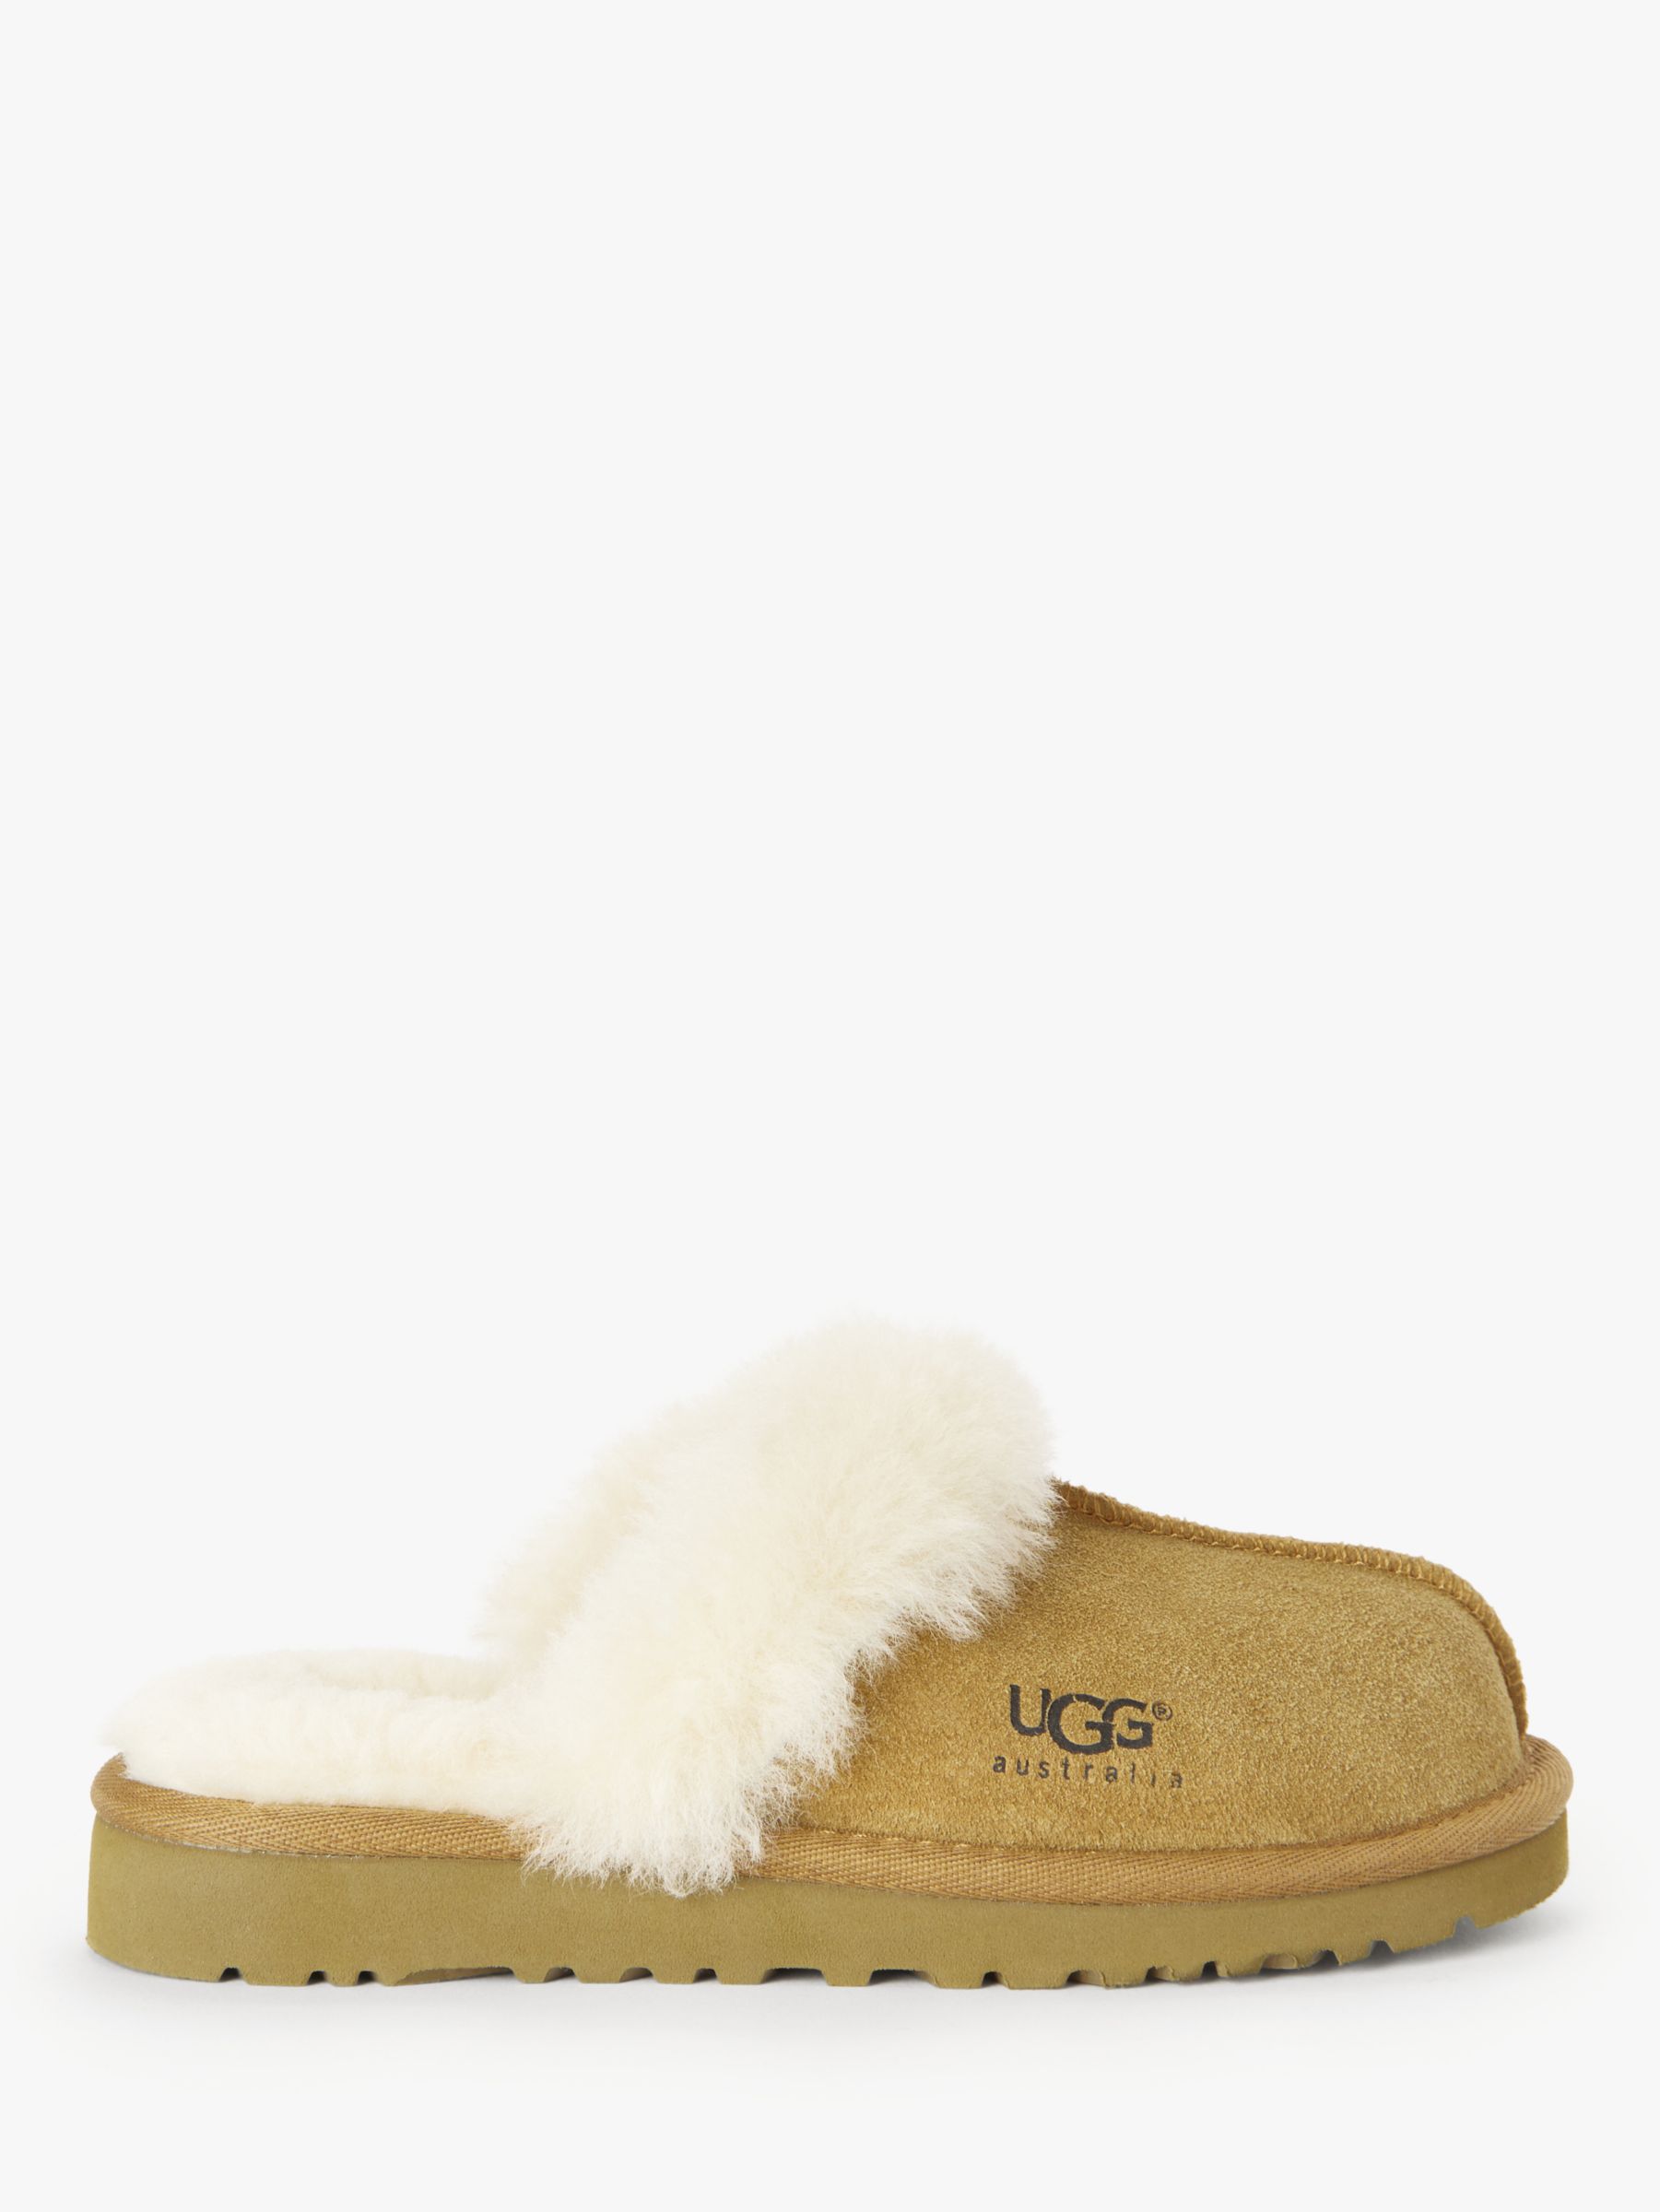 ugg cozy slippers size 4